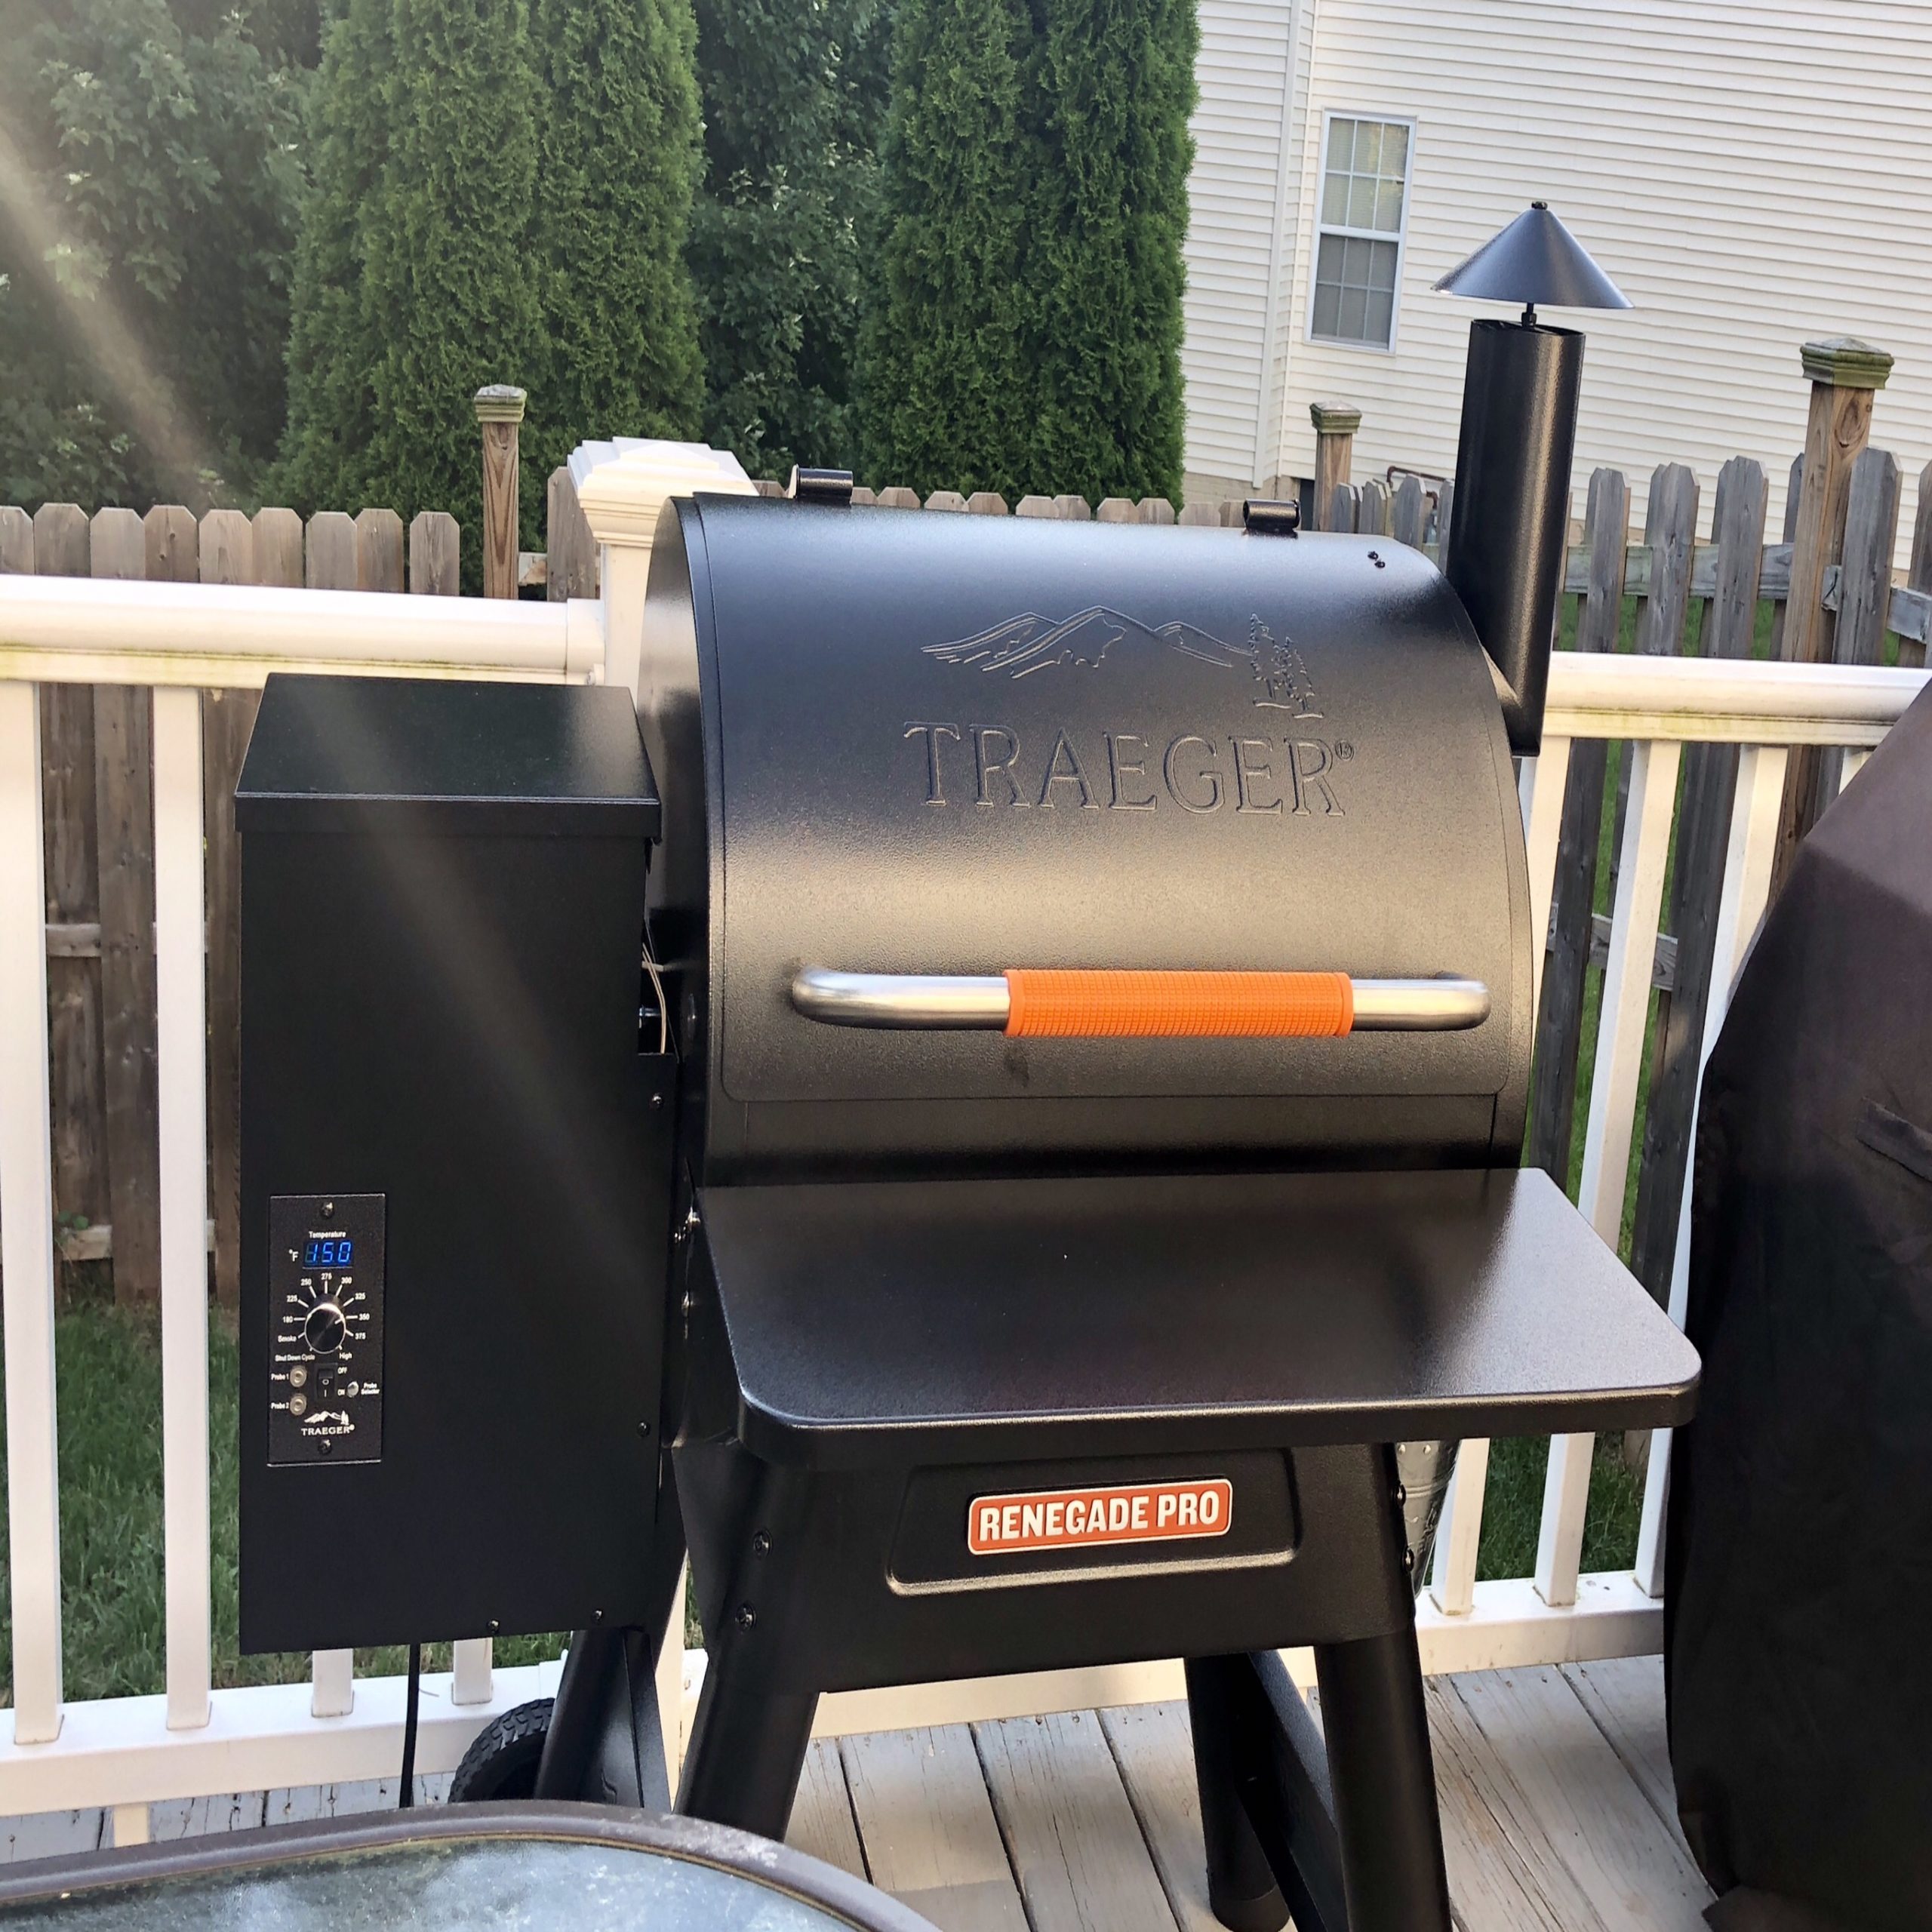 Traeger Renegade Pro – Is This The Best Pellet Grill On The Market?